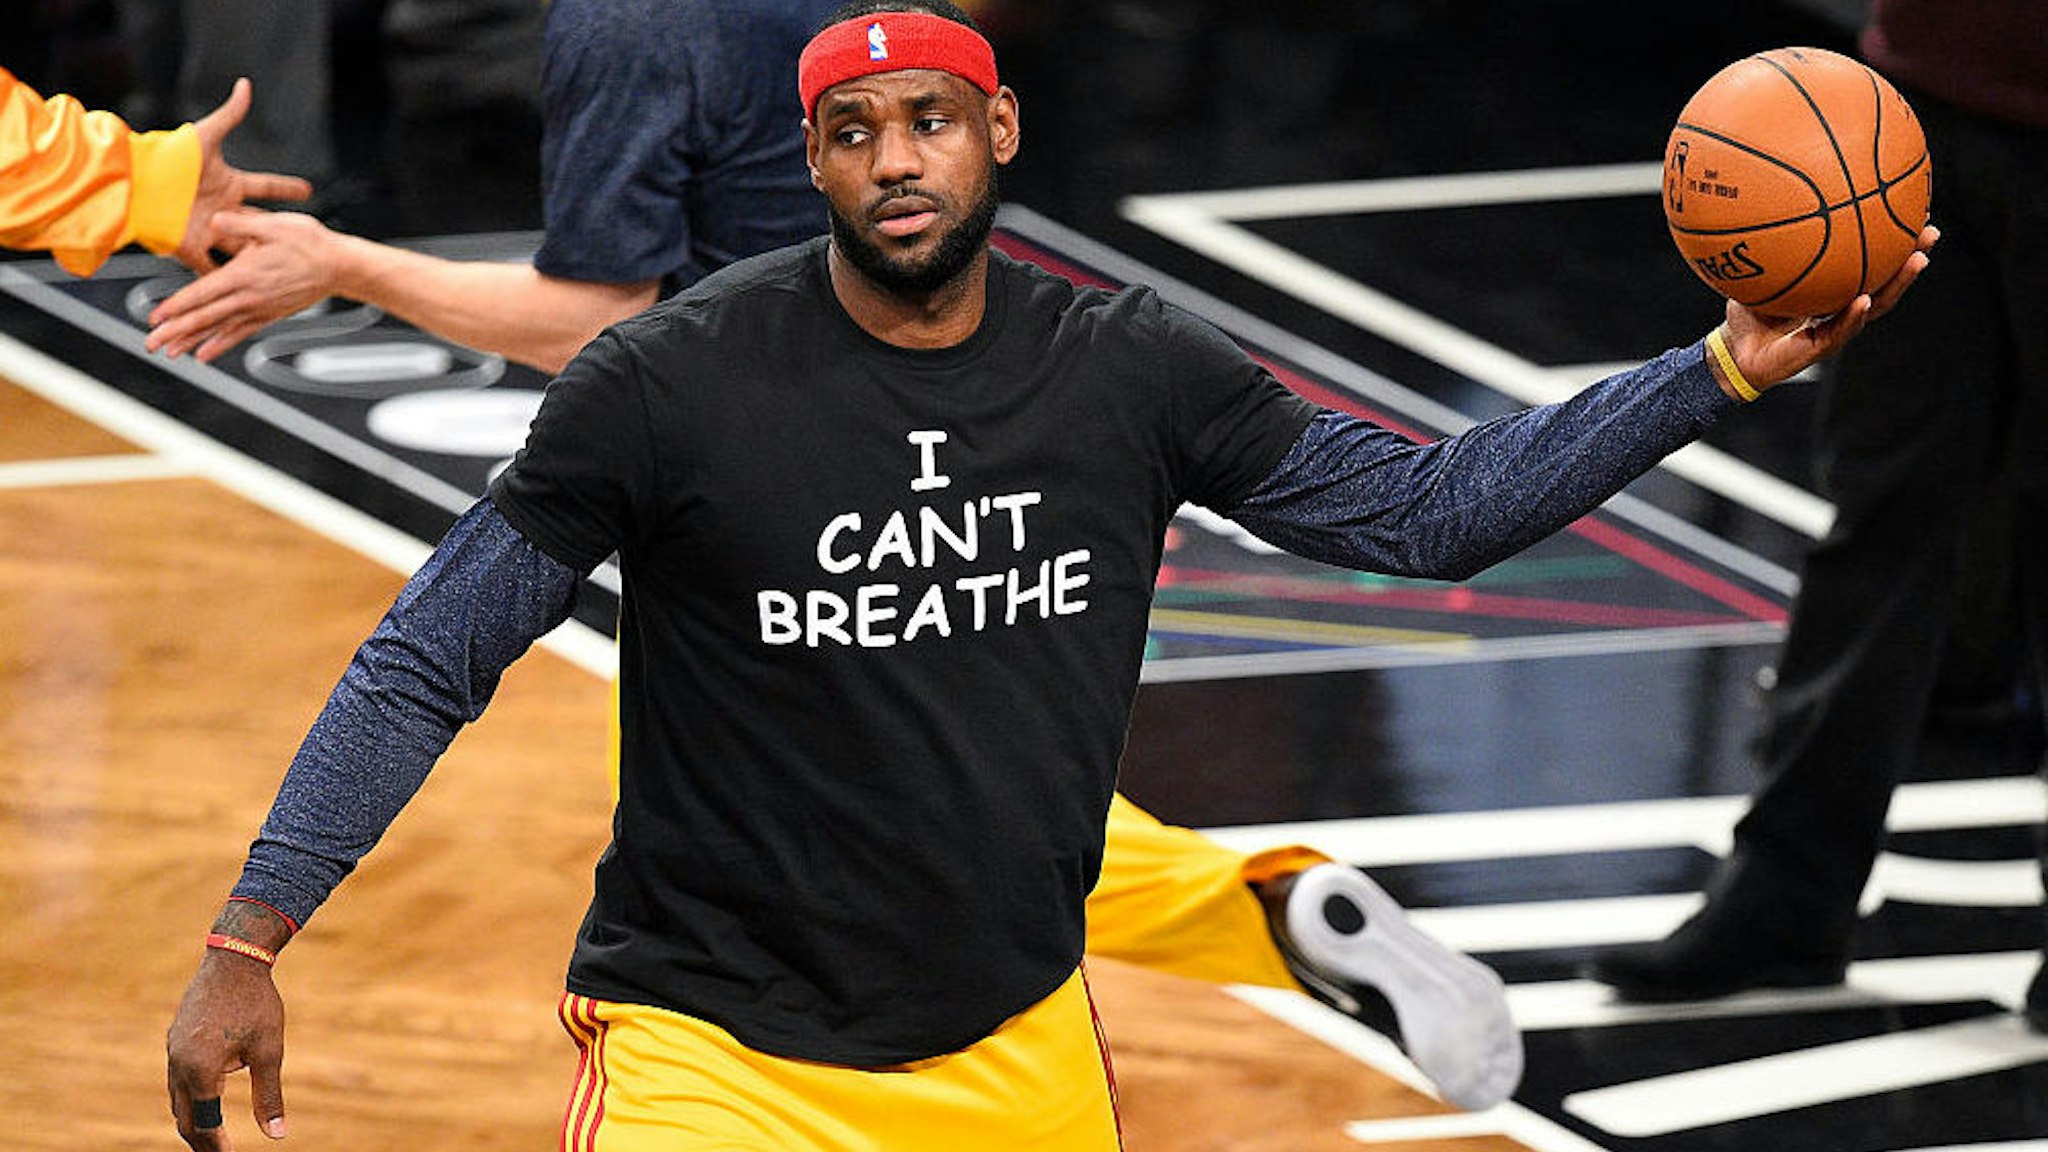 Cleveland Cavaliers forward LeBron James (23) wears a t shirt to honor Eric Garner during warmups before a NBA game between the Cleveland Cavaliers and the Brooklyn Nets at Barclays Center in Brooklyn, NY The Cleveland Cavaliers defeated the Brooklyn Nets 110-88.